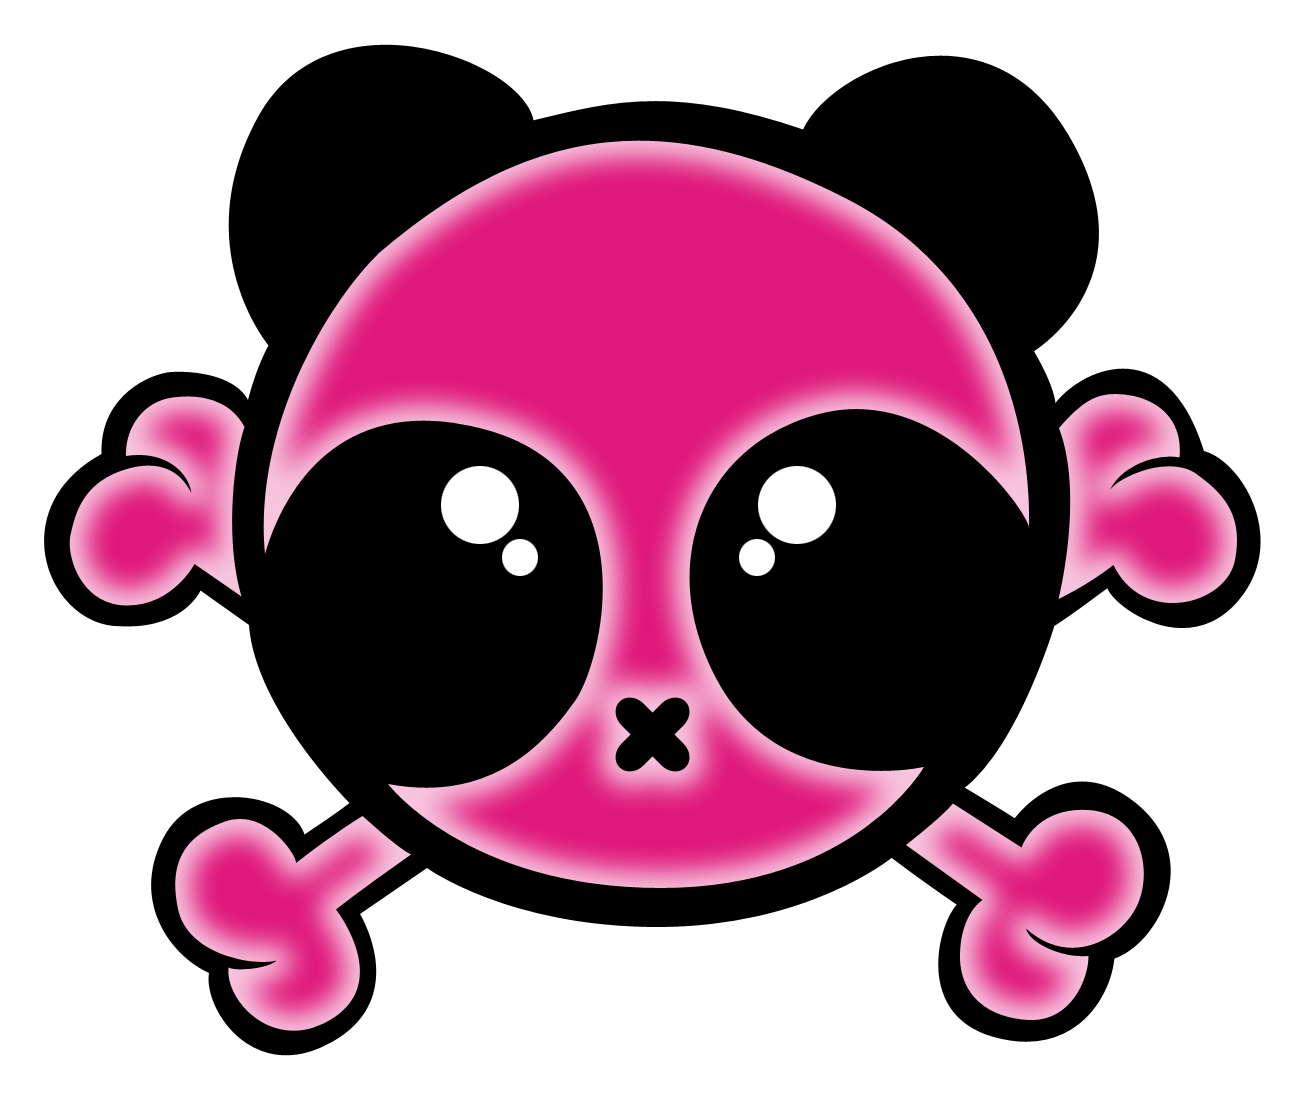 A Pink Panda With Black Eyes And Crossbones